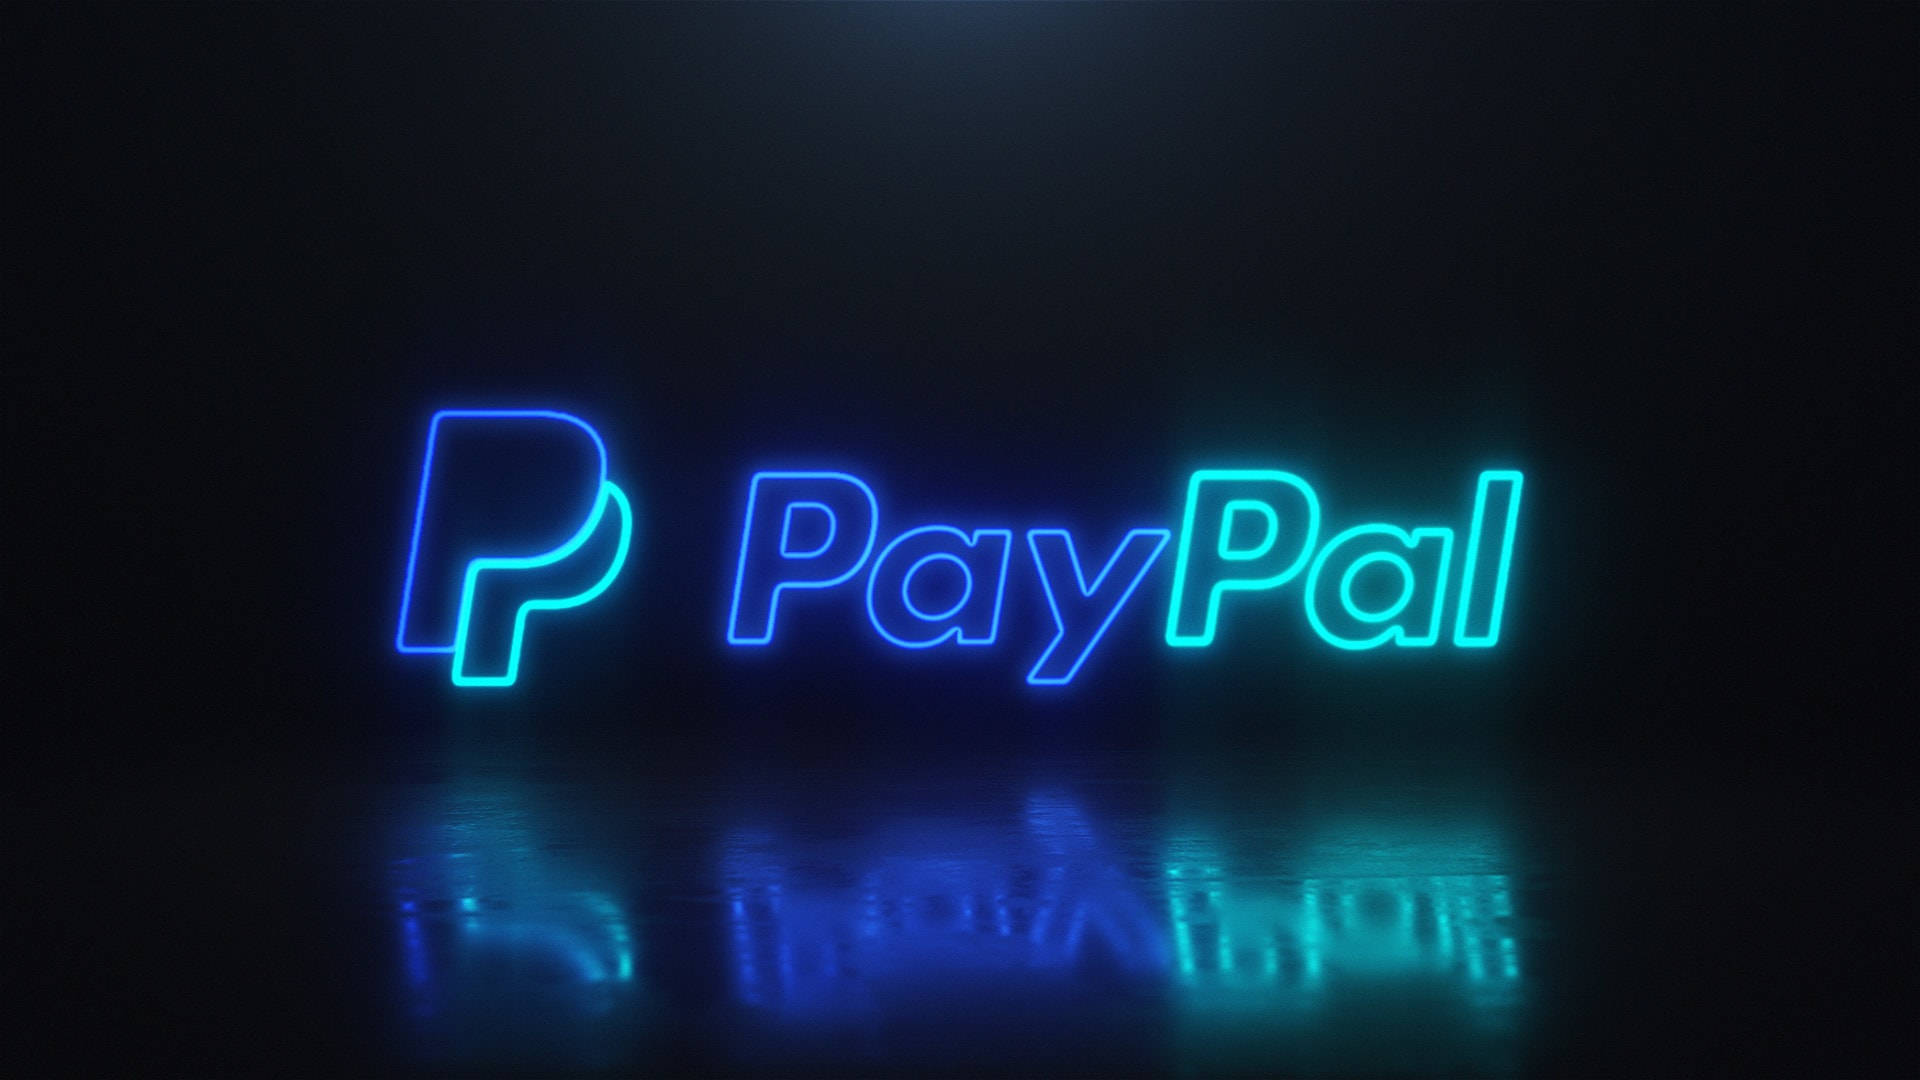 Paypal Neon Light Sign Wallpaper